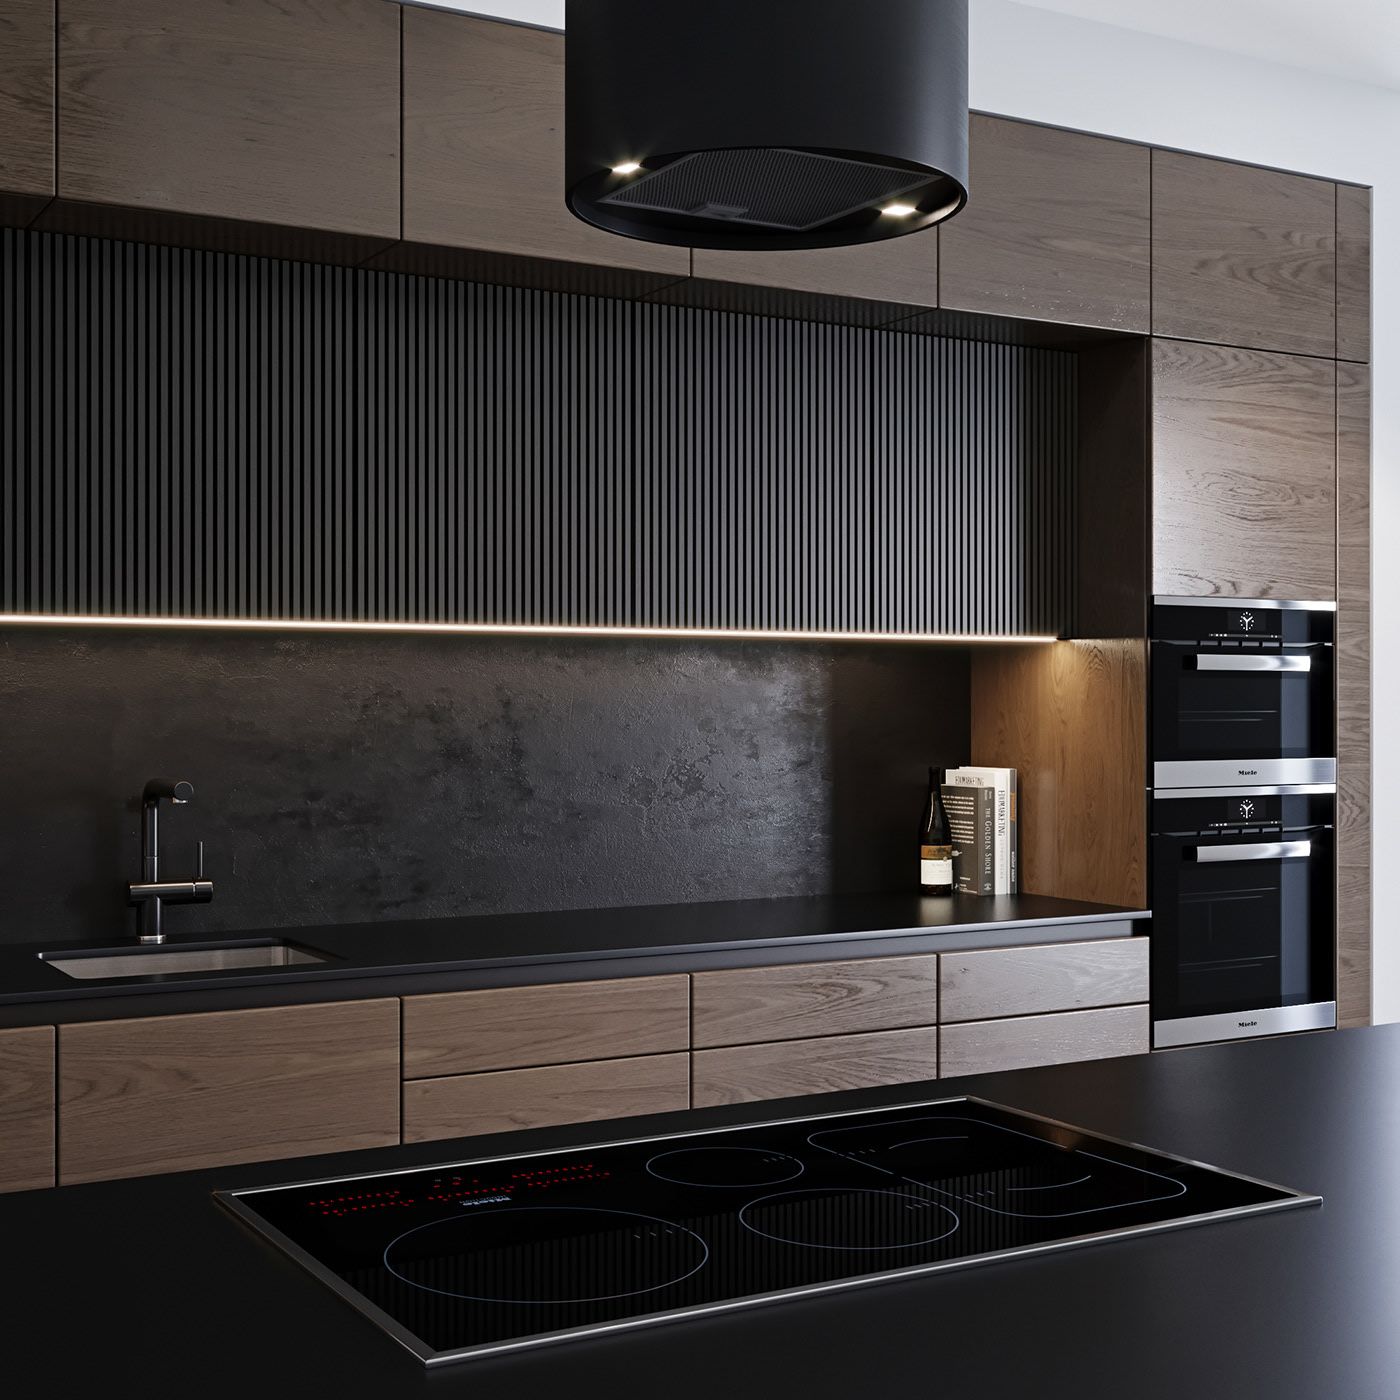 Luxury Kitchens: Create Your Dream Kitchen with Luxurious Design Elements